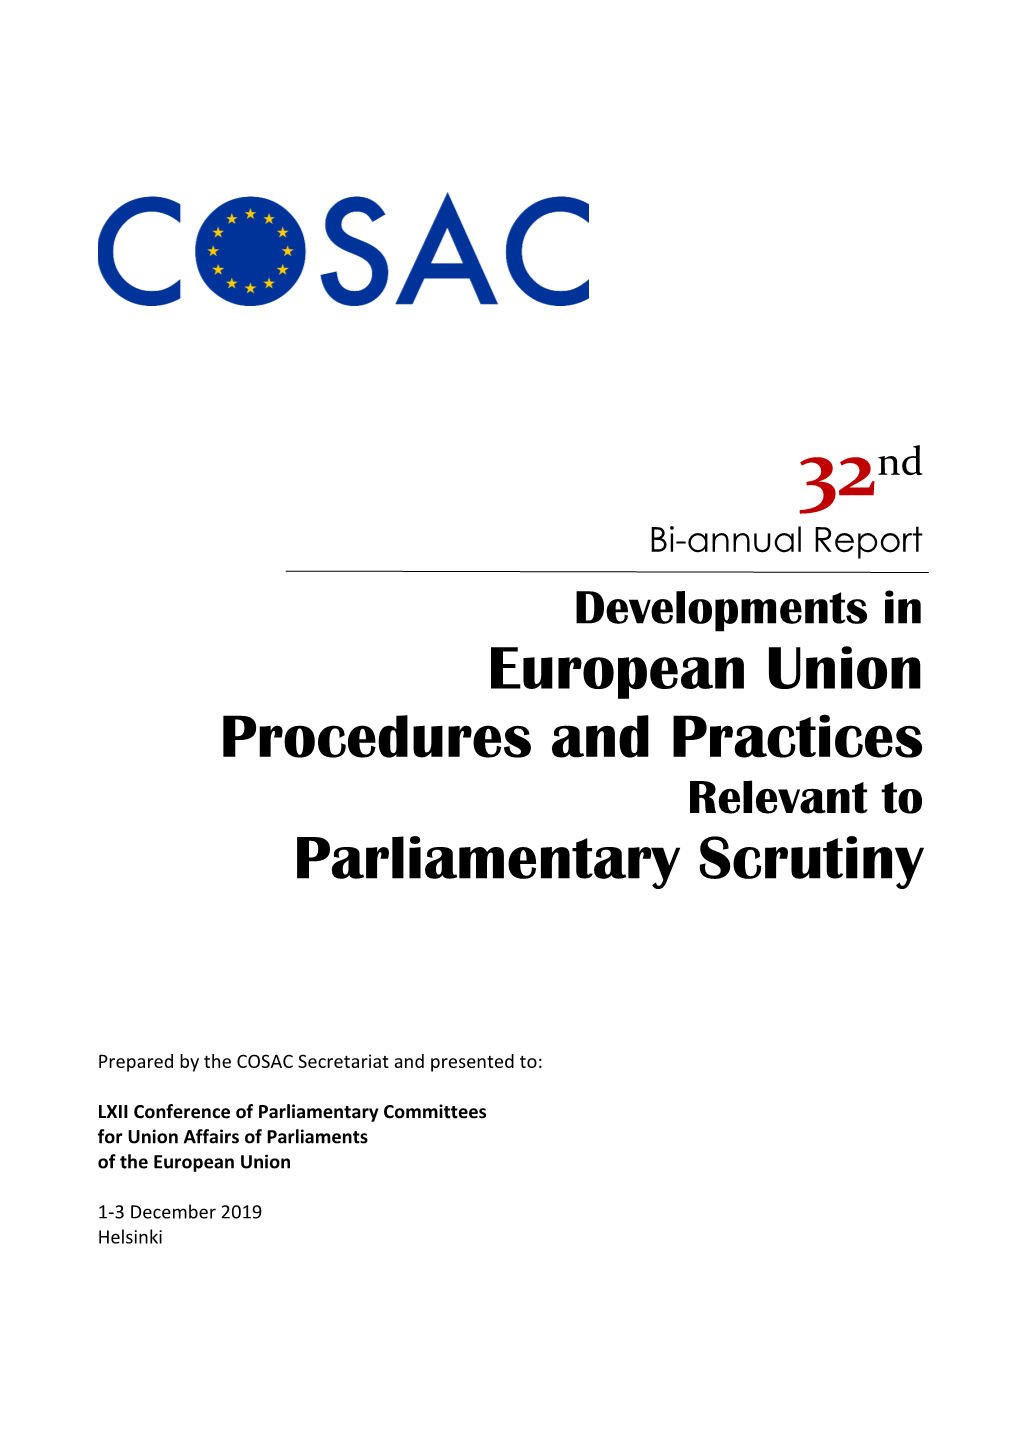 European Union Procedures and Practices Parliamentary Scrutiny